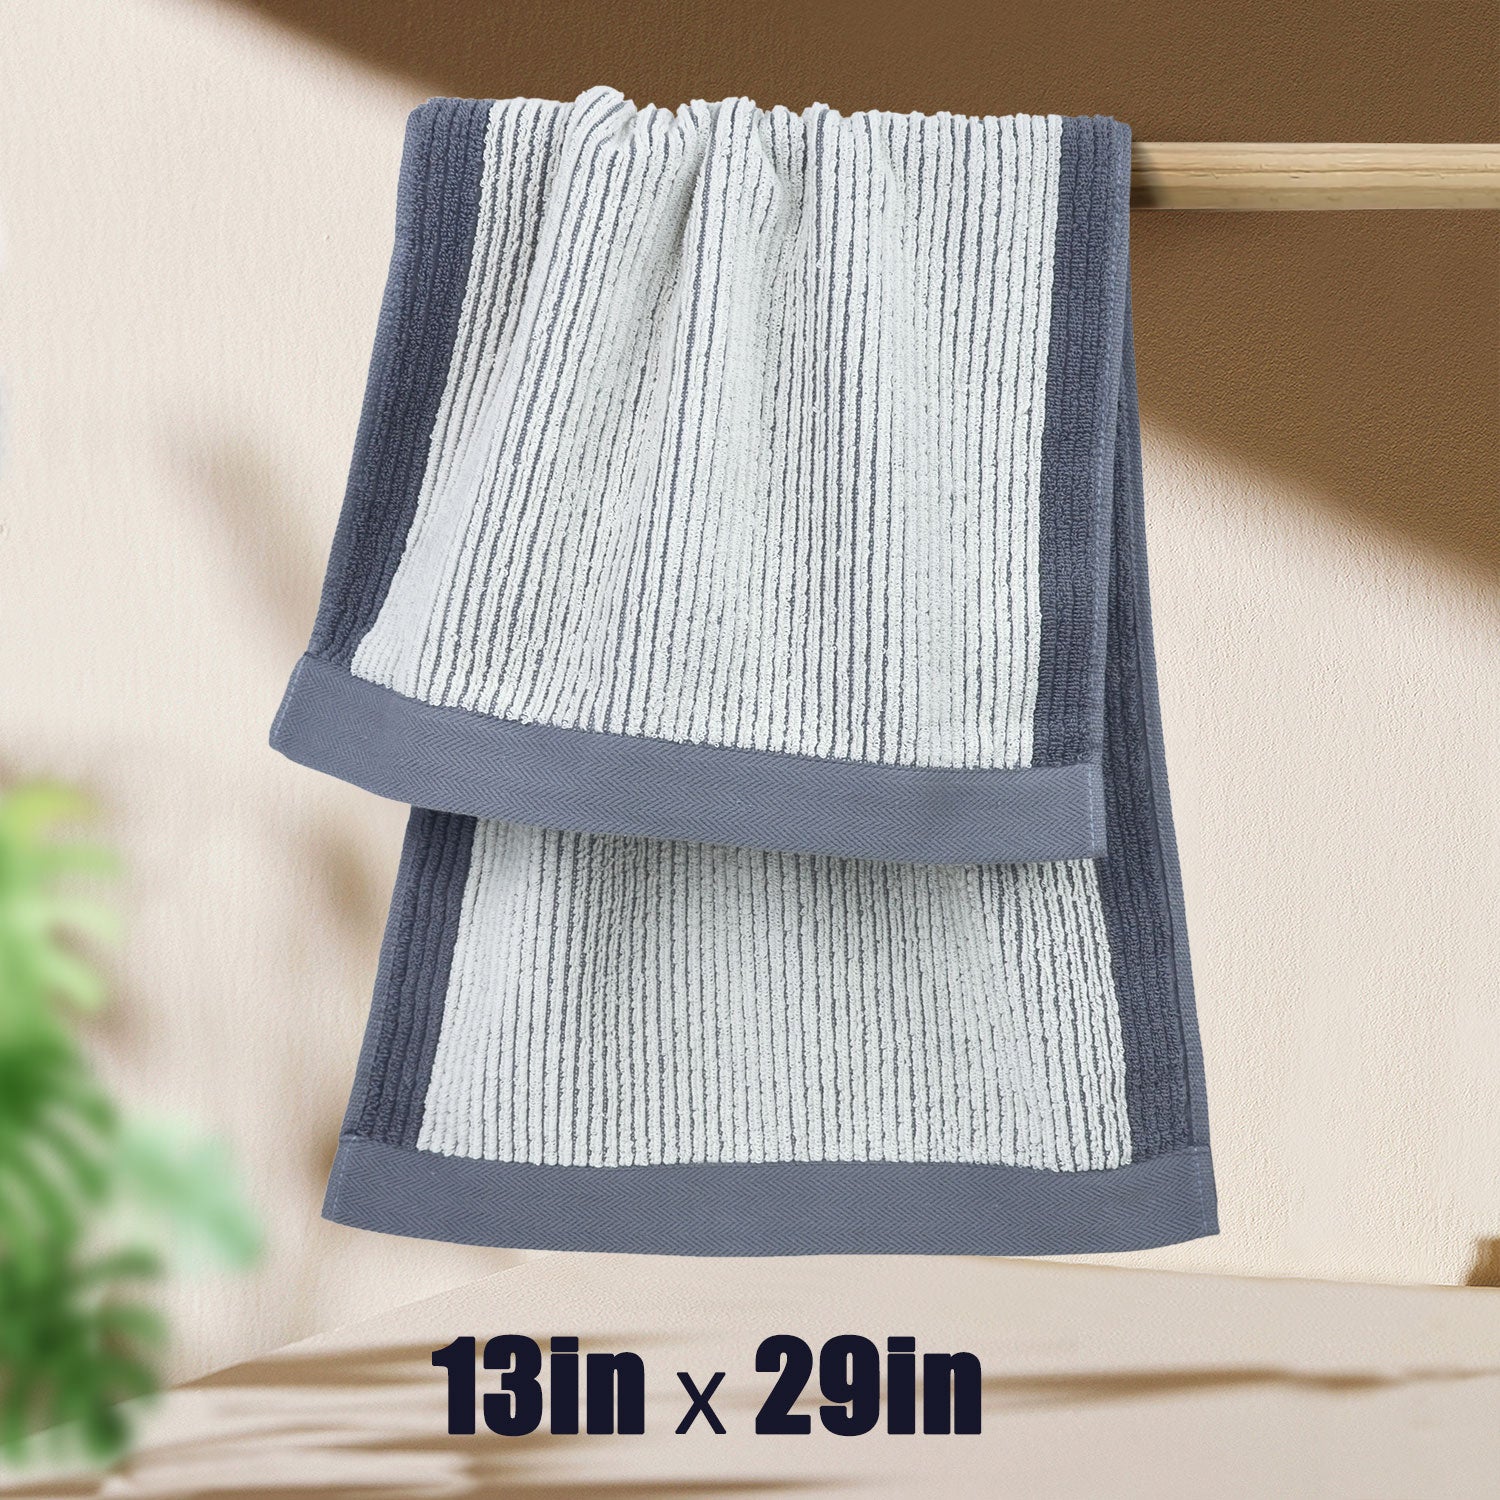 Cleanbear Hand Towels for Bathroom, Hand Towel Set of 4, Cotton Towels with Jacquard Weave Deign for Both Decoration and Daily Usage, 28 x 13 Inches